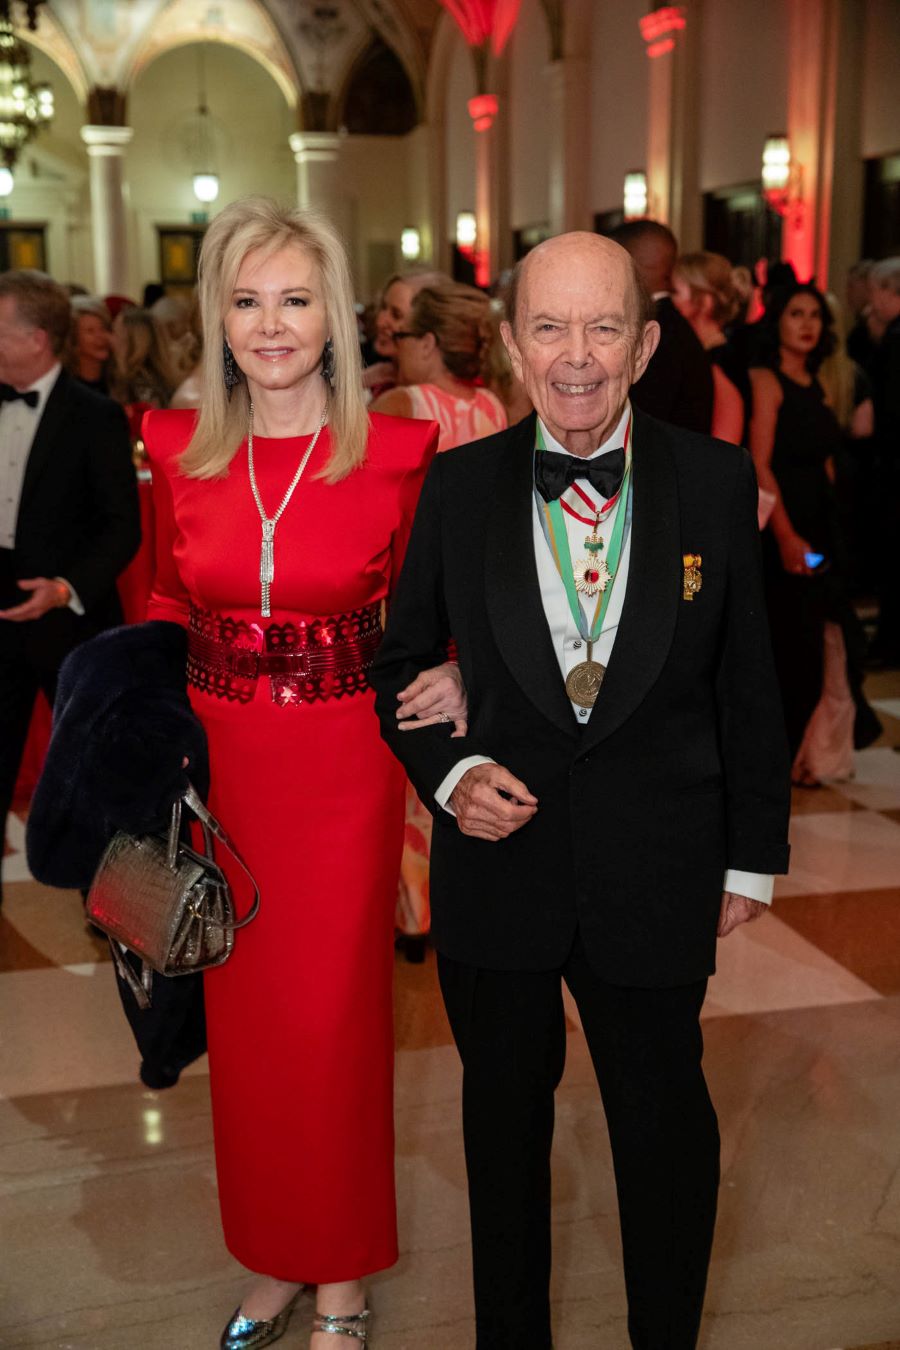 Hilary and Wilbur Ross